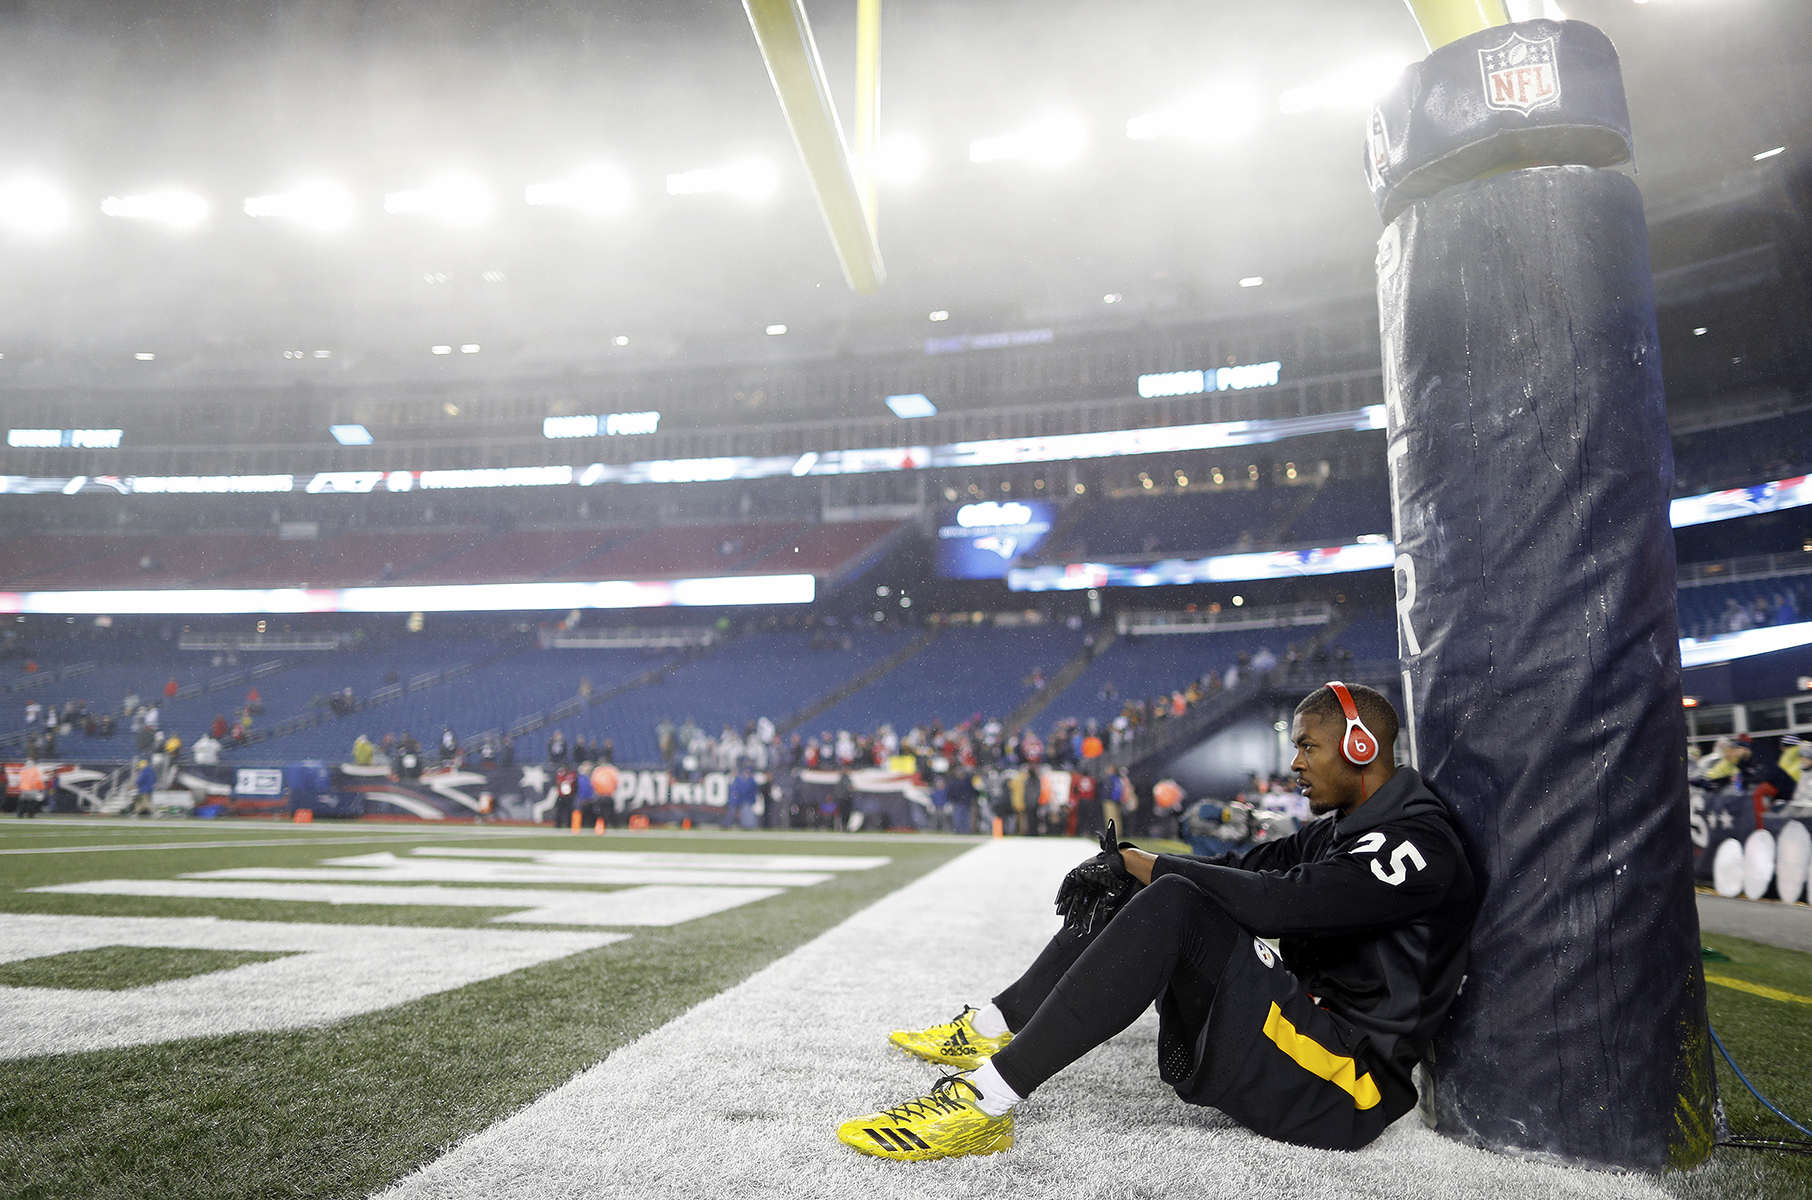 Pittsburgh Steelers rookie cornerback Artie Burns prior to the AFC Championship football game in Foxboro.
